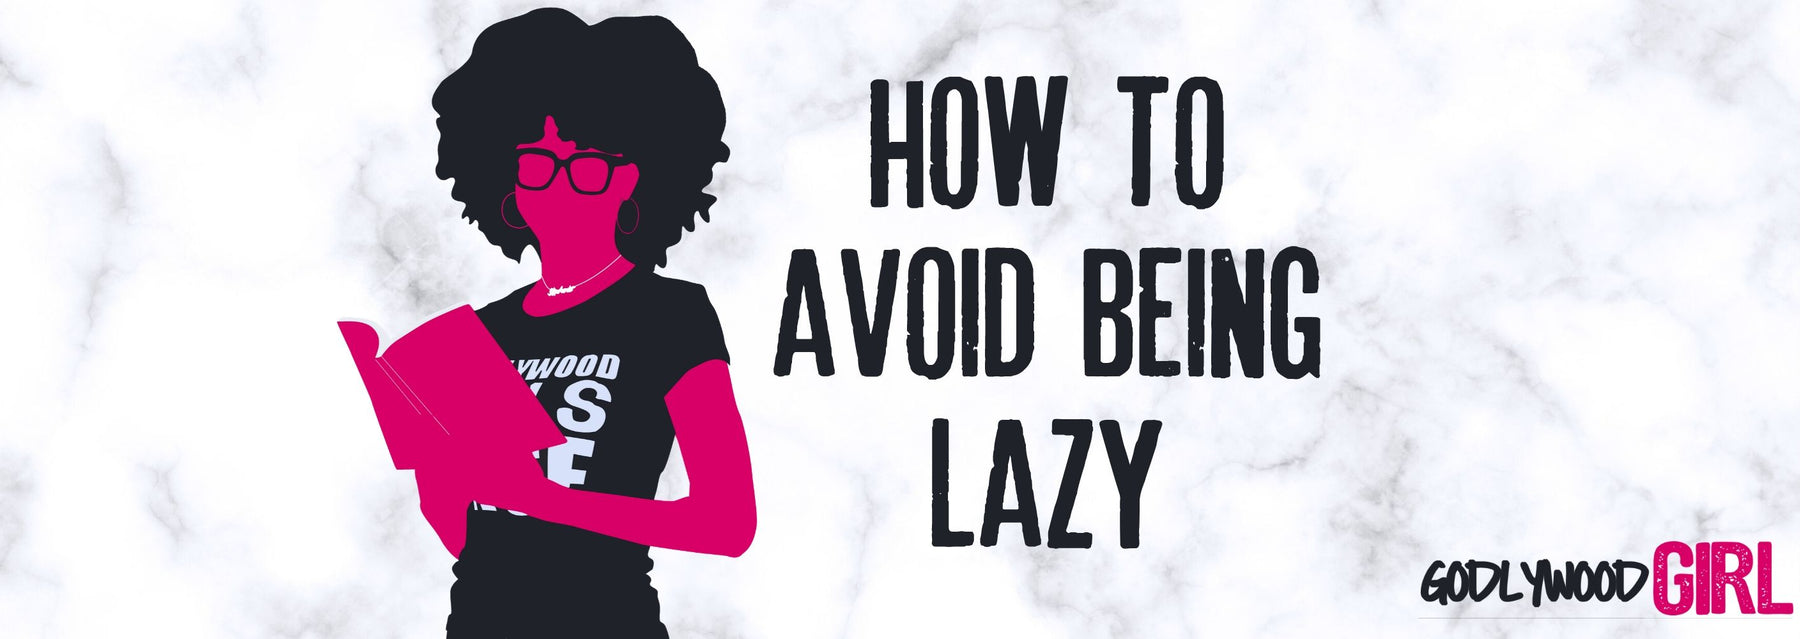 HOW TO AVOID PROCRASTINATION AND LAZINESS (3 Tips To Stop Being Lazy) || SELF-MOTIVATION SERIES #3